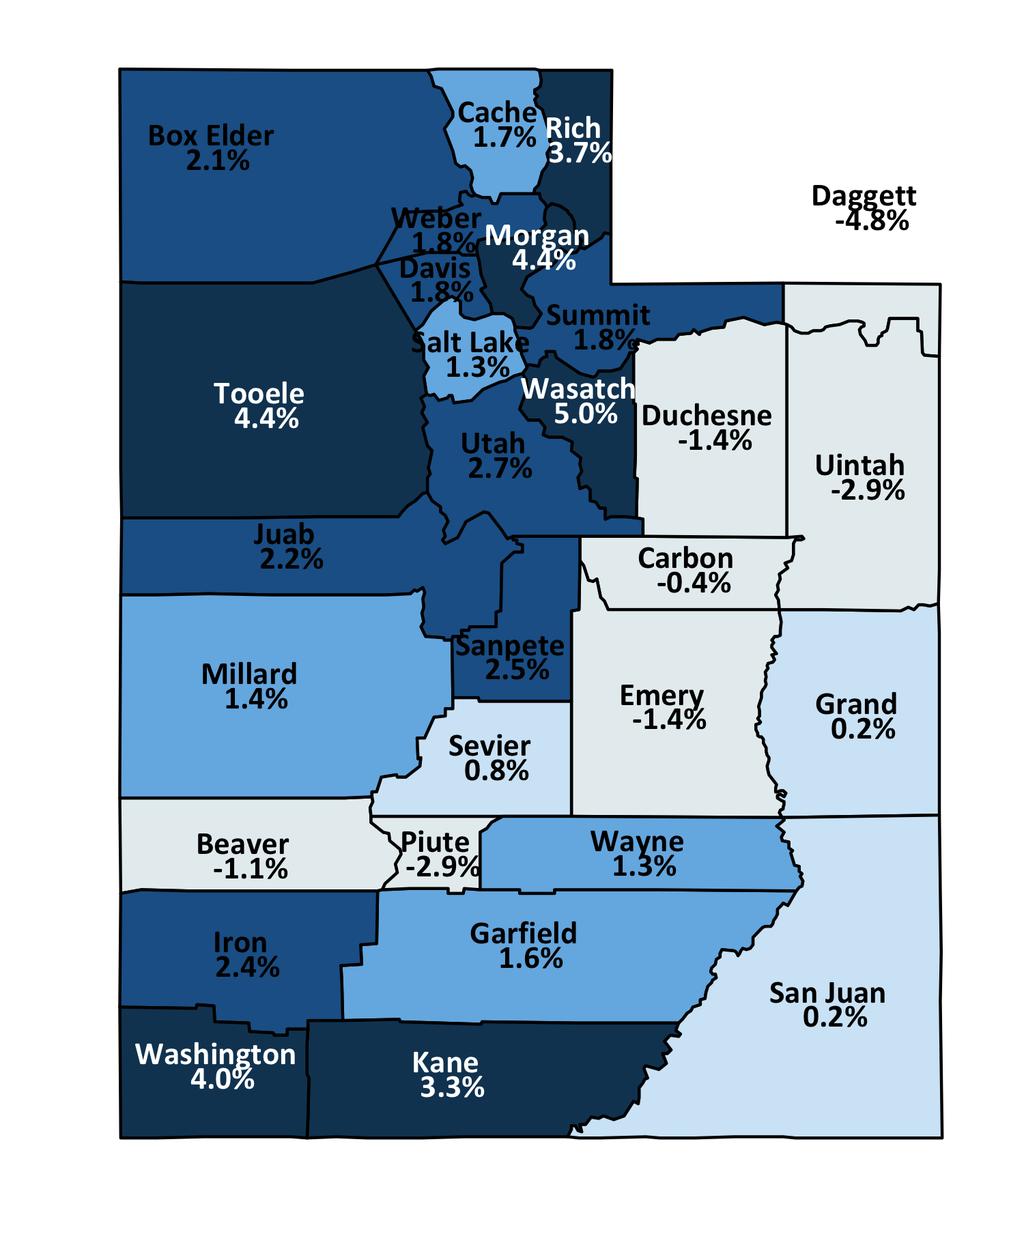 Utah Population Growth Rates By County 2016 to 2017 State Average = 1.9% 3.